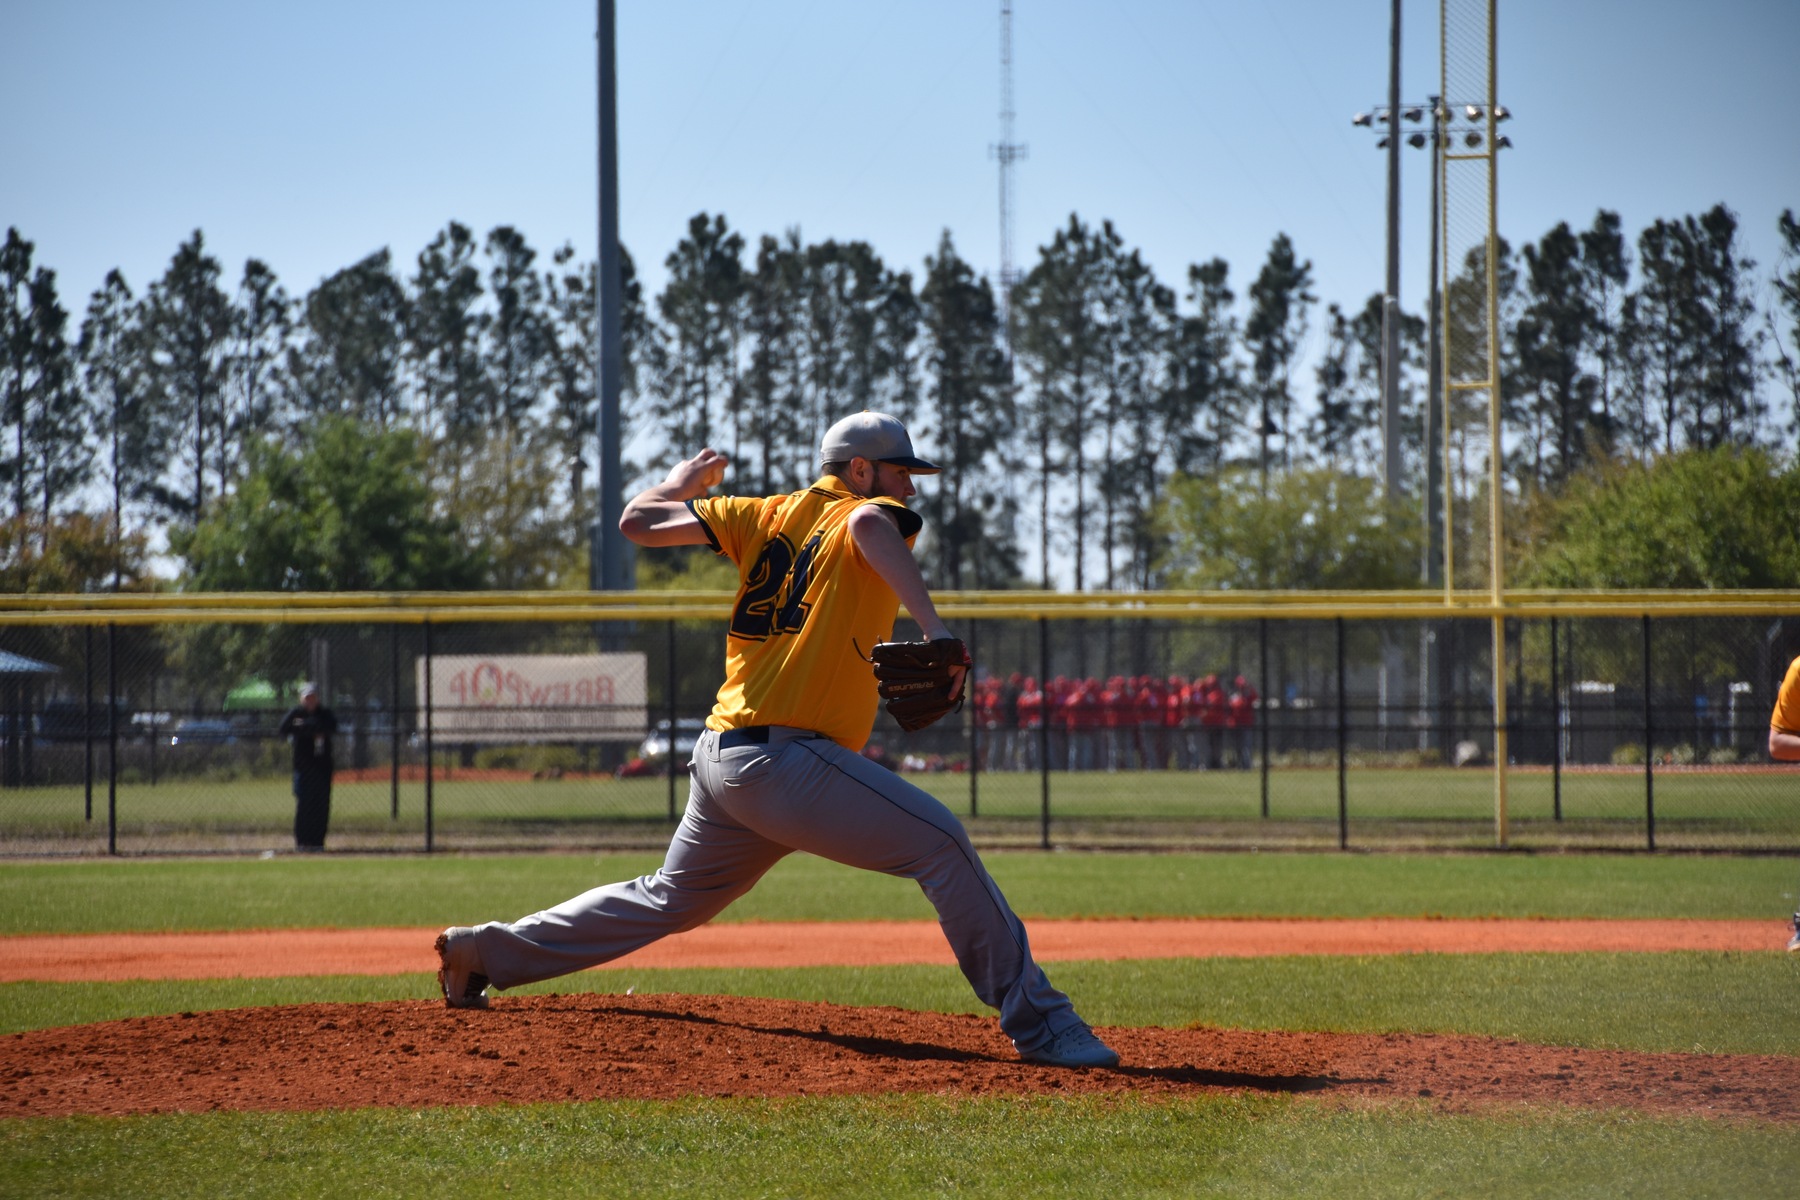 New wins third MASCAC pitcher of the week honor